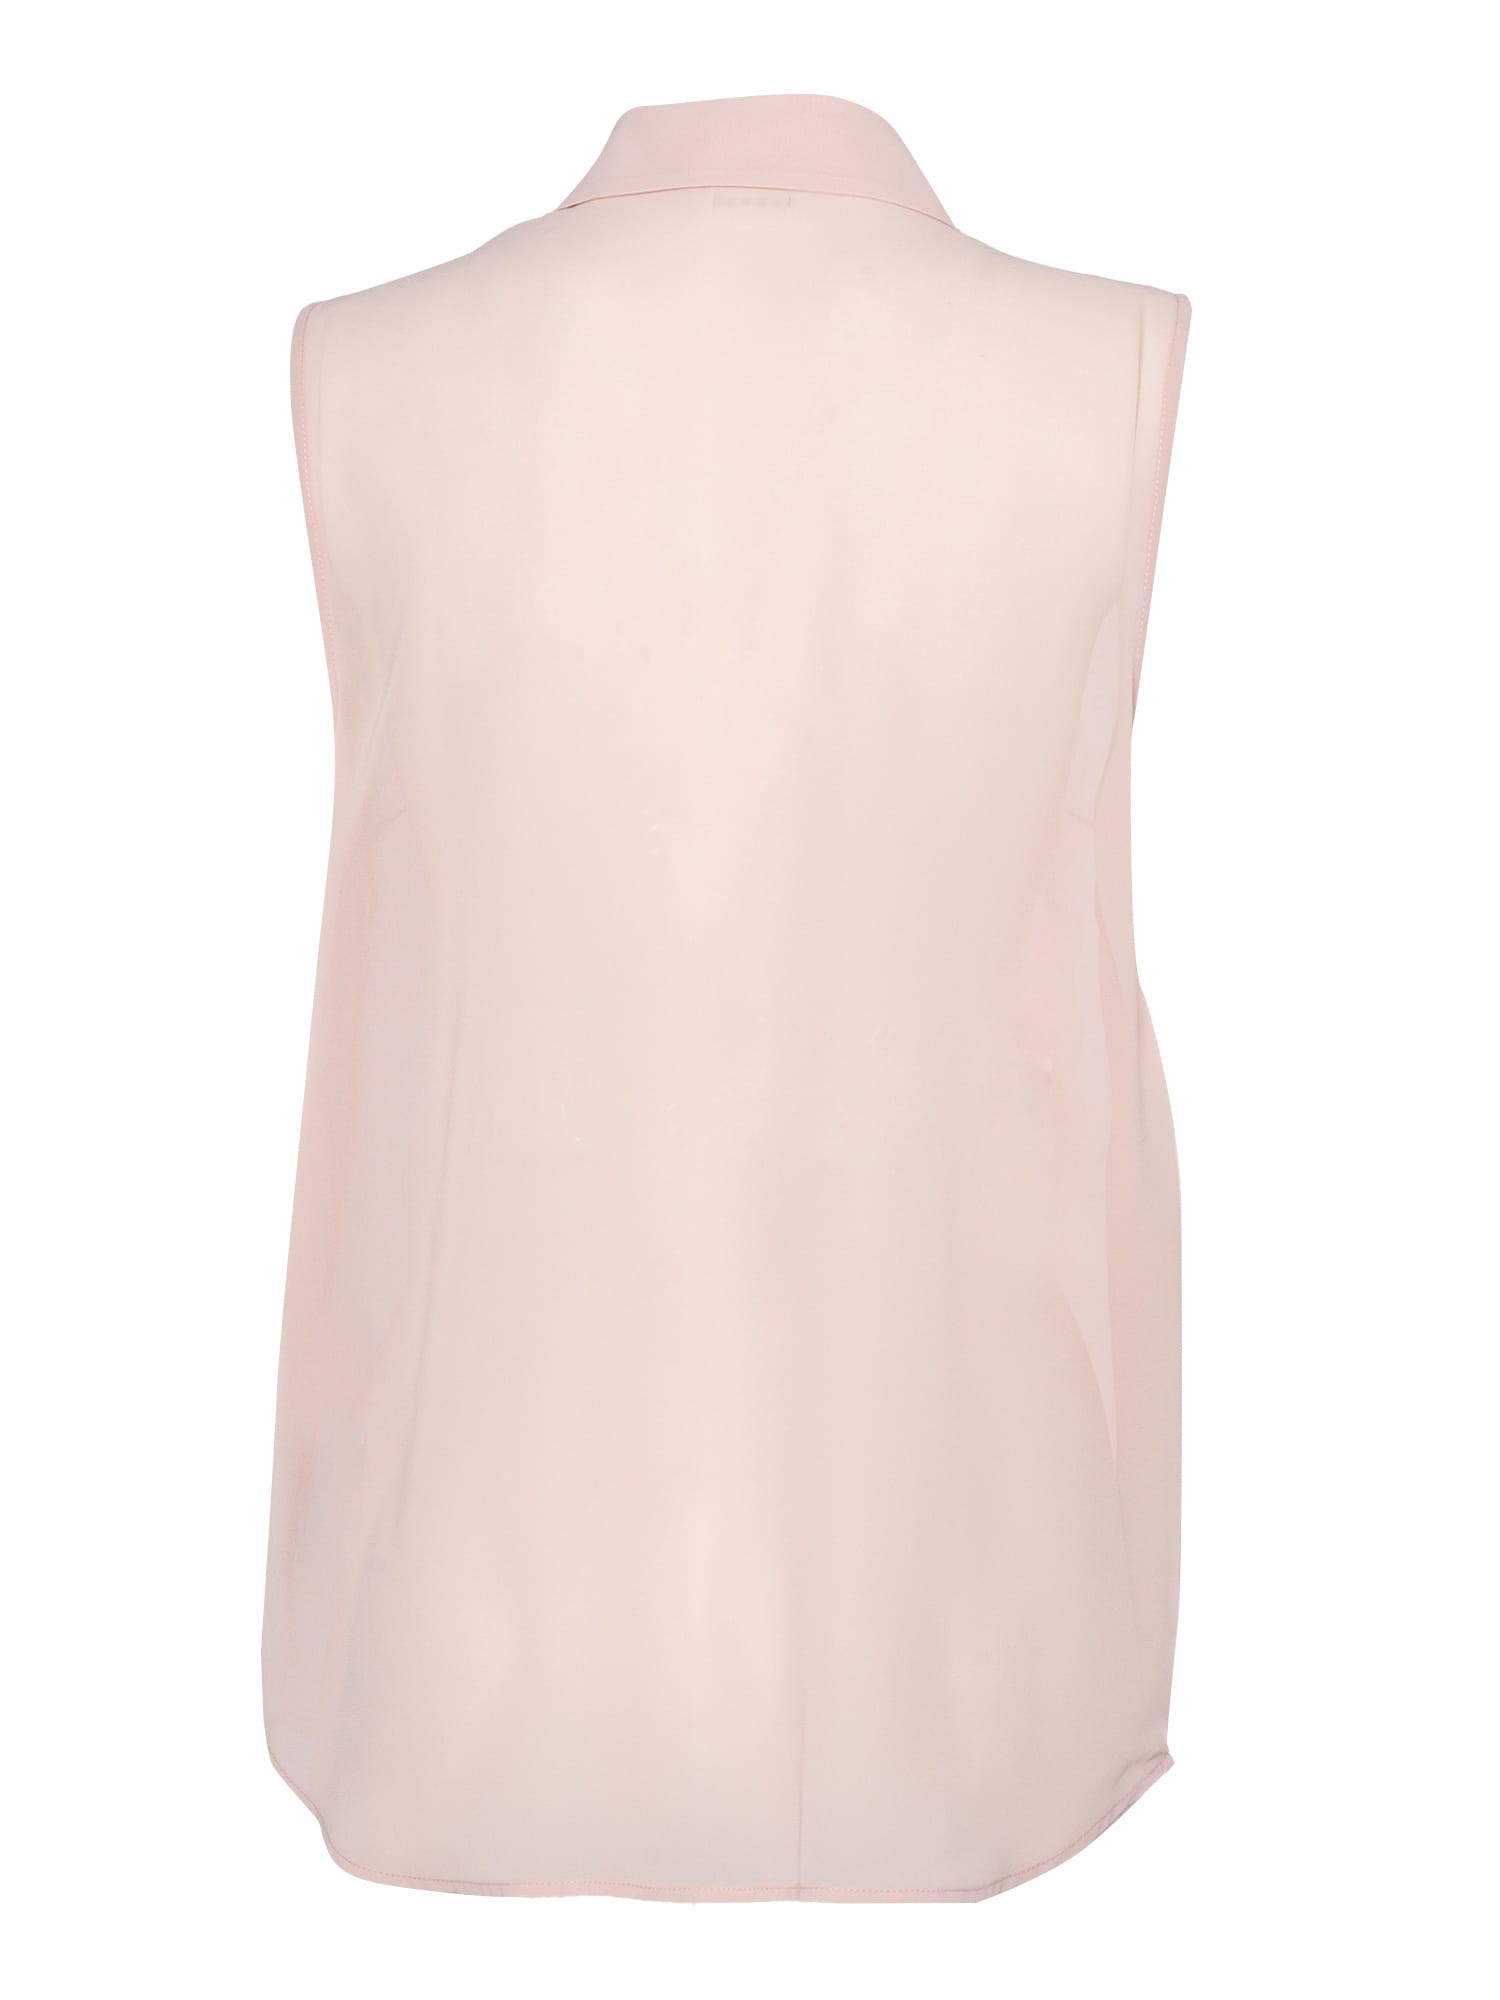 Shop P.a.r.o.s.h Sleeveless Blouse In Pink